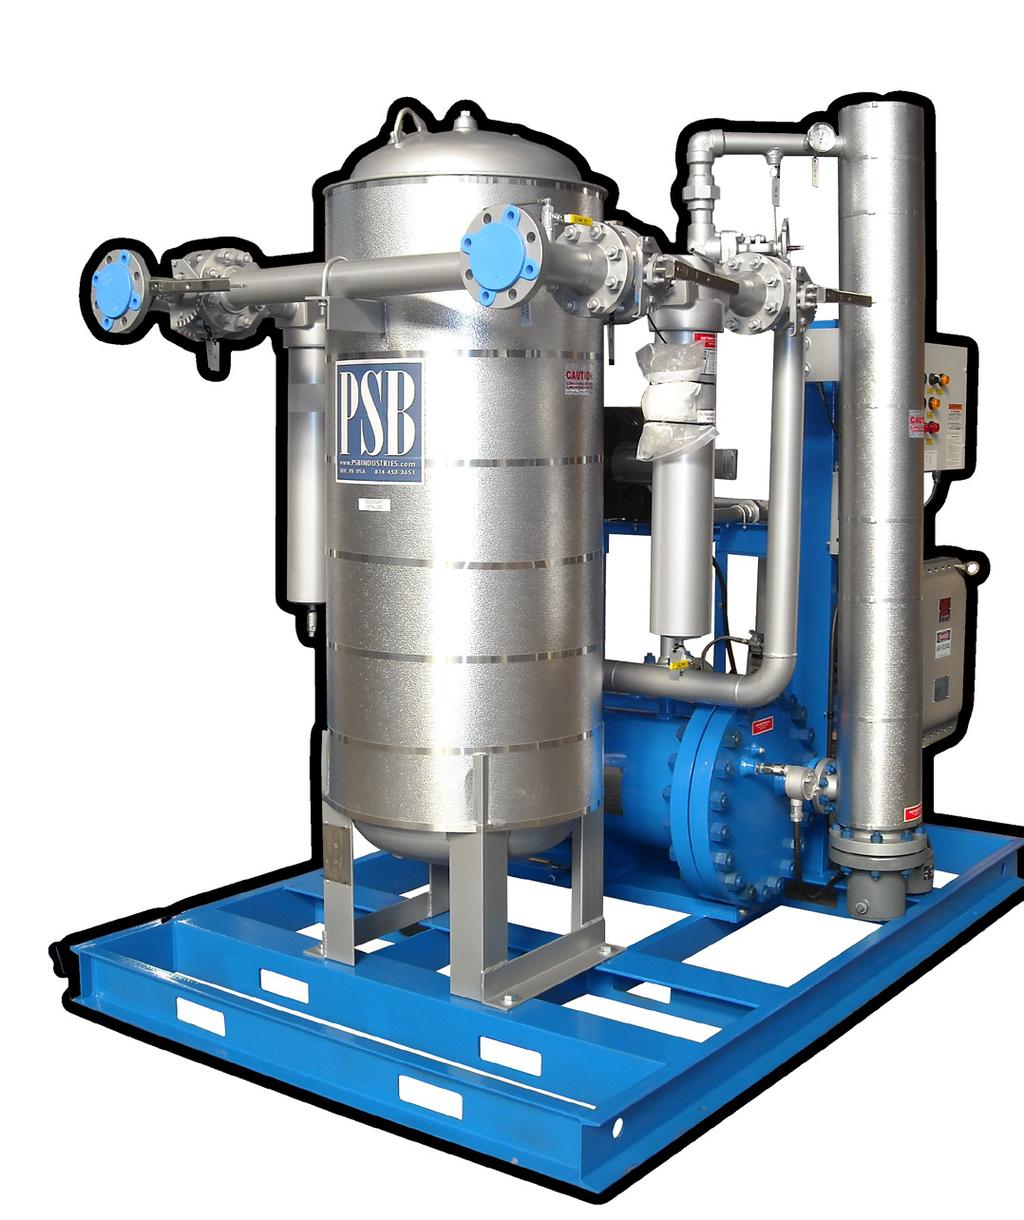 NG-SR Single Vessel Manual Regeneration PSB type NG-SR is an ideal system for drying small to medium volumes of natural gas for stations with intermittent use.